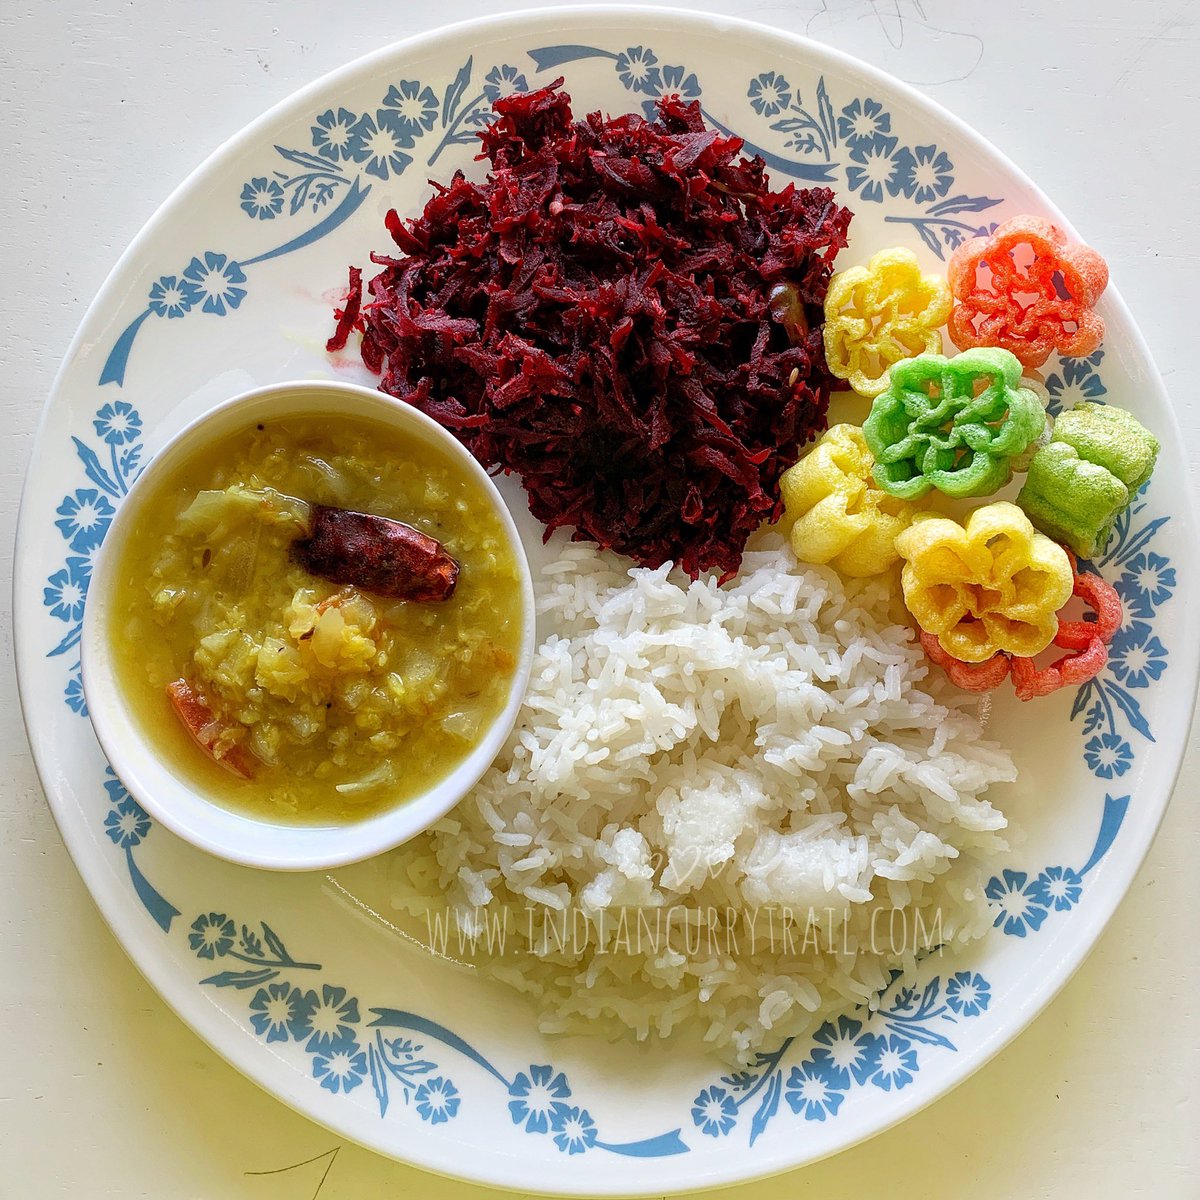 Very Basic meal story!!!

🍉 Rice
🍉 Cabbage moong dal
🍉 Beets stirfry
🍉 Fryums

#recipe for cabbage dal - youtu.be/ZKYK5B-aJRs

#indiancurrytrail #whatisforlunch